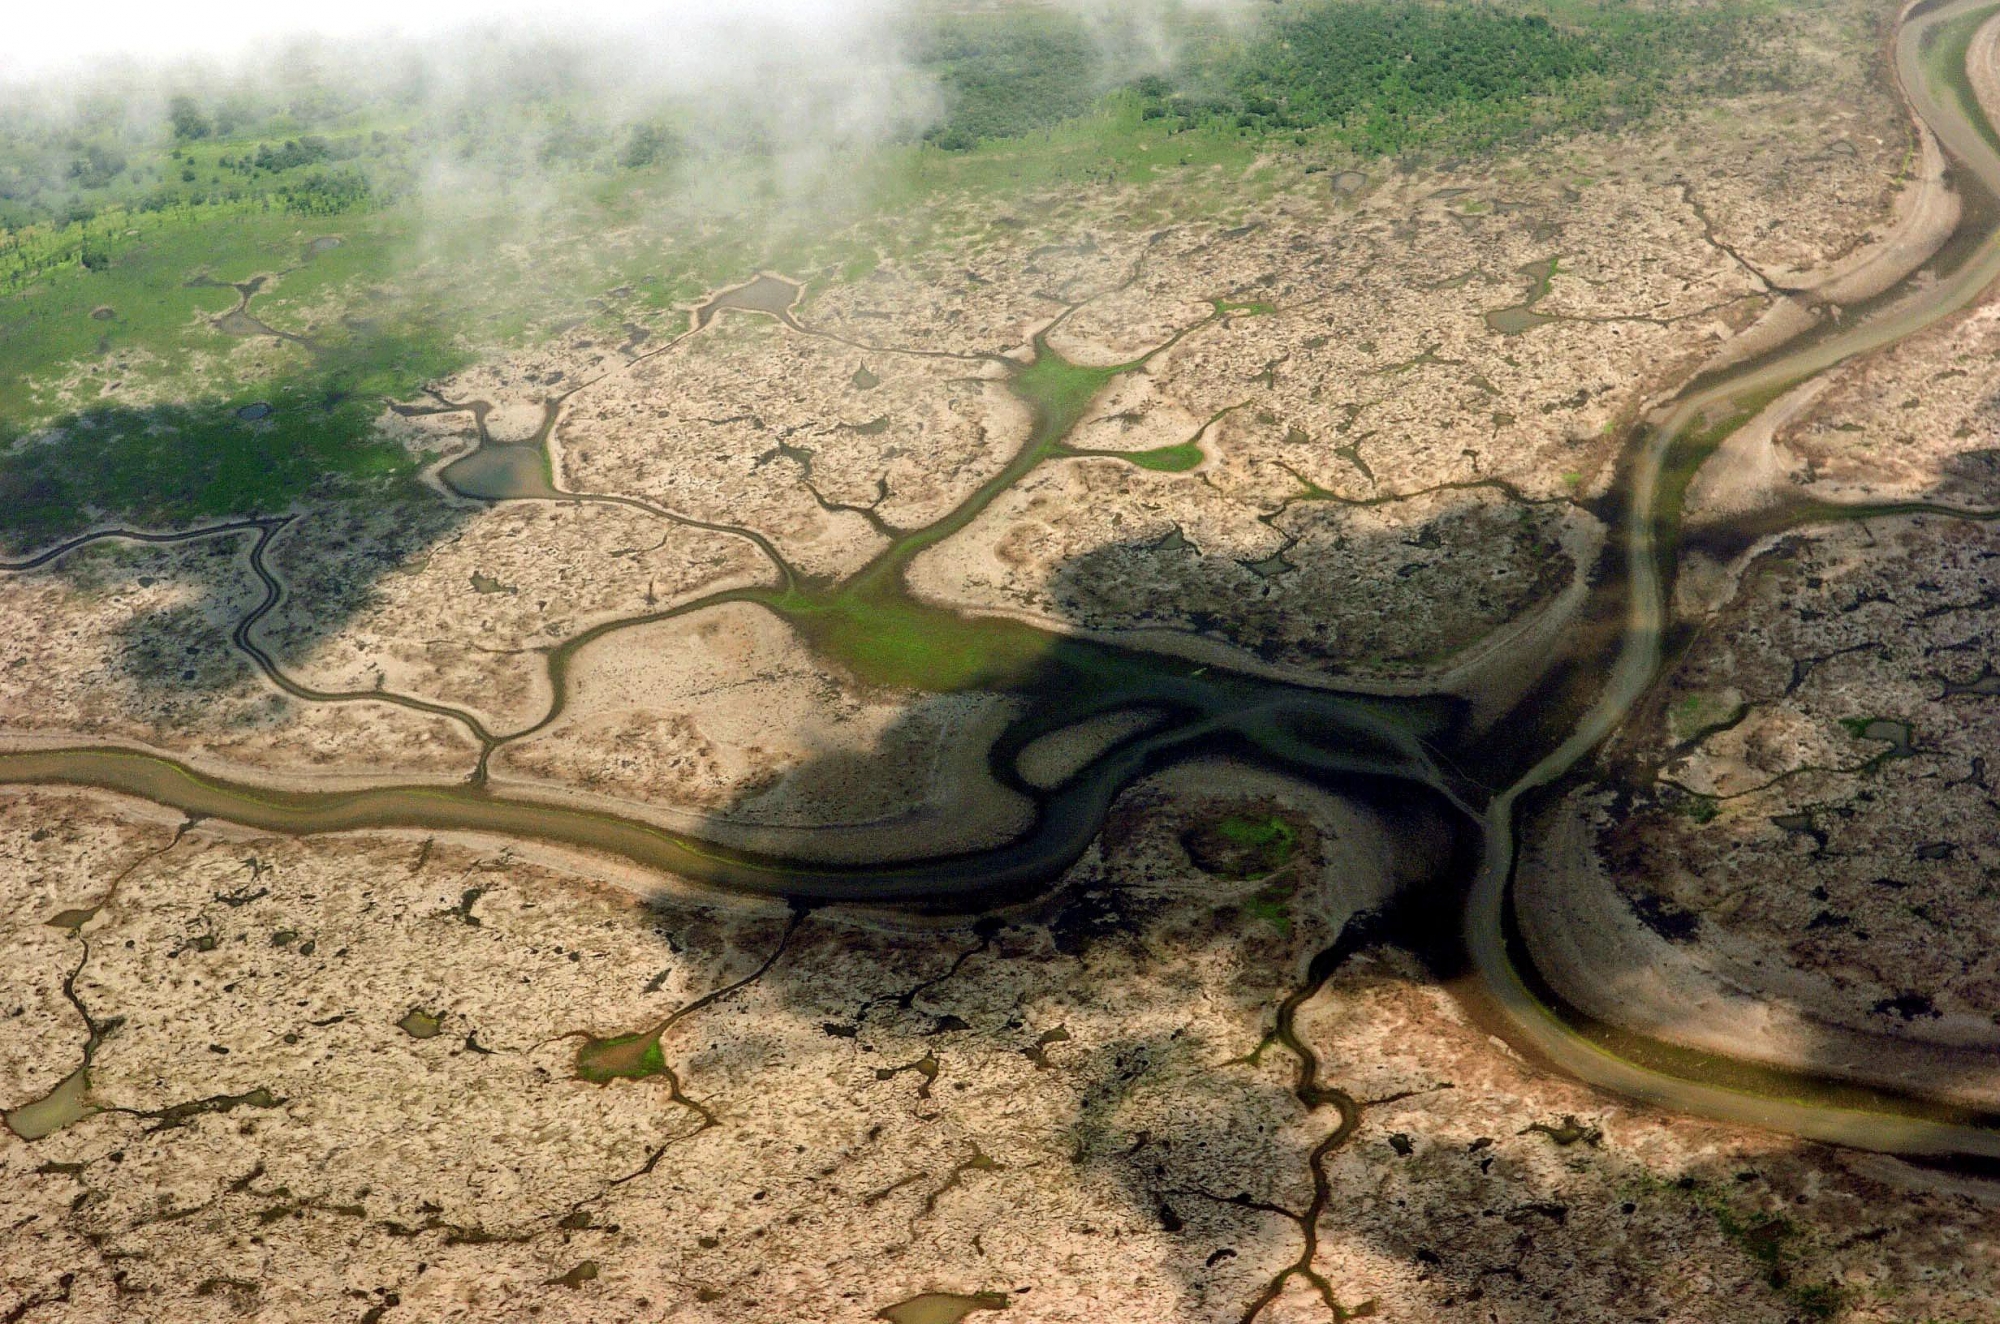 FILE - In this Oct. 12, 2005 file photo is seen the Anama Lake after a drought affected the levels of parts of the Amazon River in Manaus, Brazil.   In 2005, the water level of the Amazon dropped by several feet because of a months long drought, halting travel and harming the important fishing industry. In 2009, communities along the river are adding new floors to their stilt houses, trying to stay above rising floodwaters that have killed 44 people and left 376,000 homeless.  (AP Photo/Luiz Vasconcelos, Interfoto, File) Brazil Climate Chaos